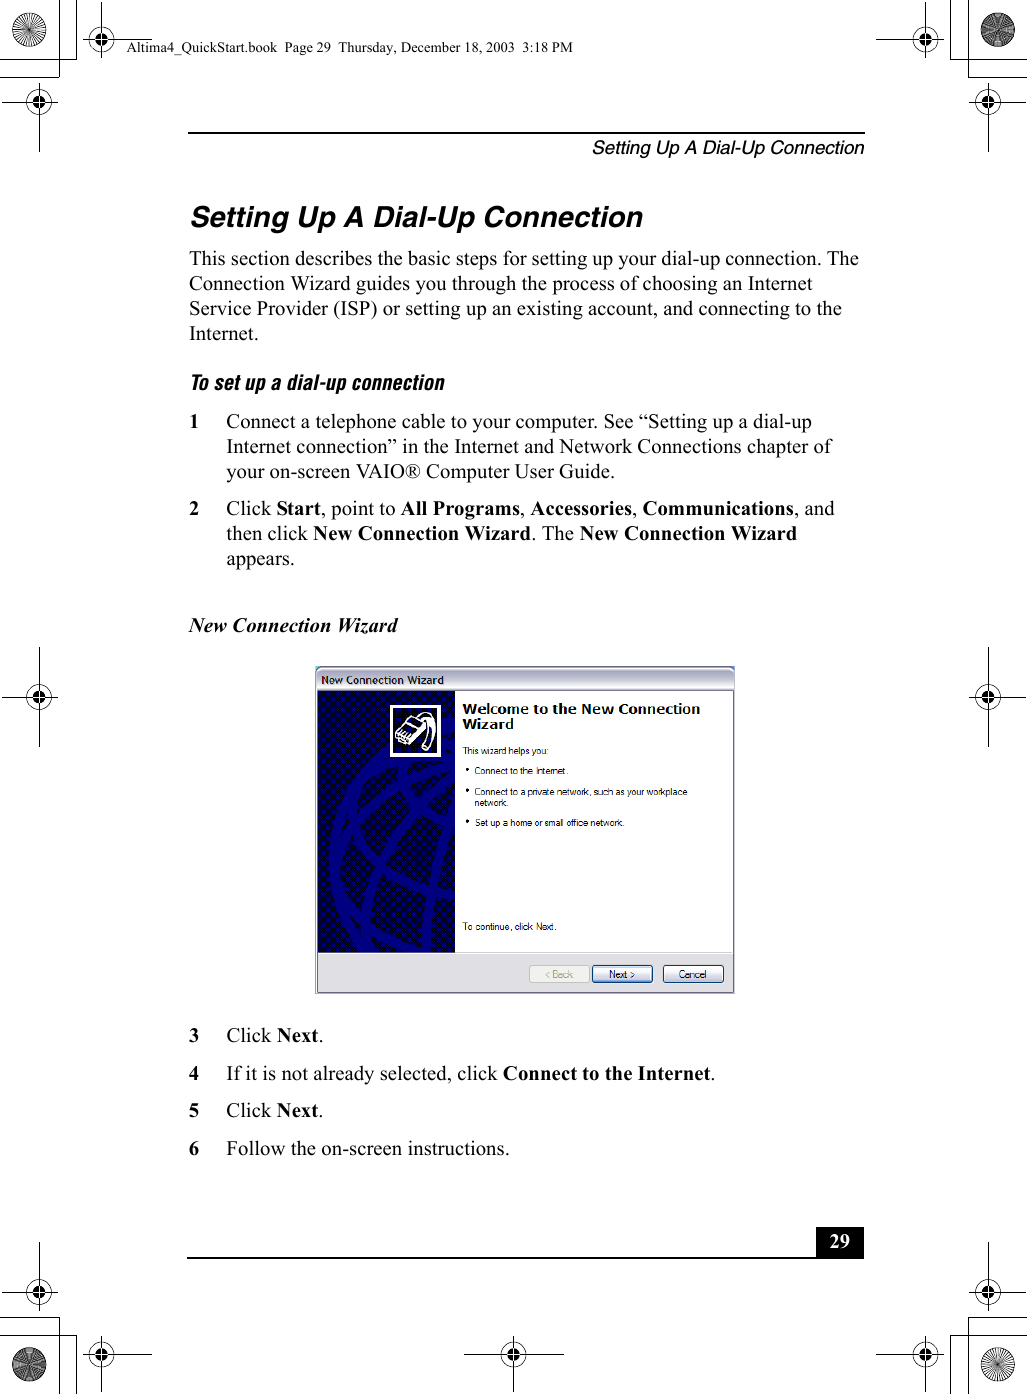 Setting Up A Dial-Up Connection29Setting Up A Dial-Up ConnectionThis section describes the basic steps for setting up your dial-up connection. The Connection Wizard guides you through the process of choosing an Internet Service Provider (ISP) or setting up an existing account, and connecting to the Internet.To set up a dial-up connection 1Connect a telephone cable to your computer. See “Setting up a dial-up Internet connection” in the Internet and Network Connections chapter of your on-screen VAIO® Computer User Guide.2Click Start, point to All Programs, Accessories, Communications, and then click New Connection Wizard. The New Connection Wizard appears.3Click Next.4If it is not already selected, click Connect to the Internet.5Click Next.6Follow the on-screen instructions.New Connection Wizard Altima4_QuickStart.book  Page 29  Thursday, December 18, 2003  3:18 PM